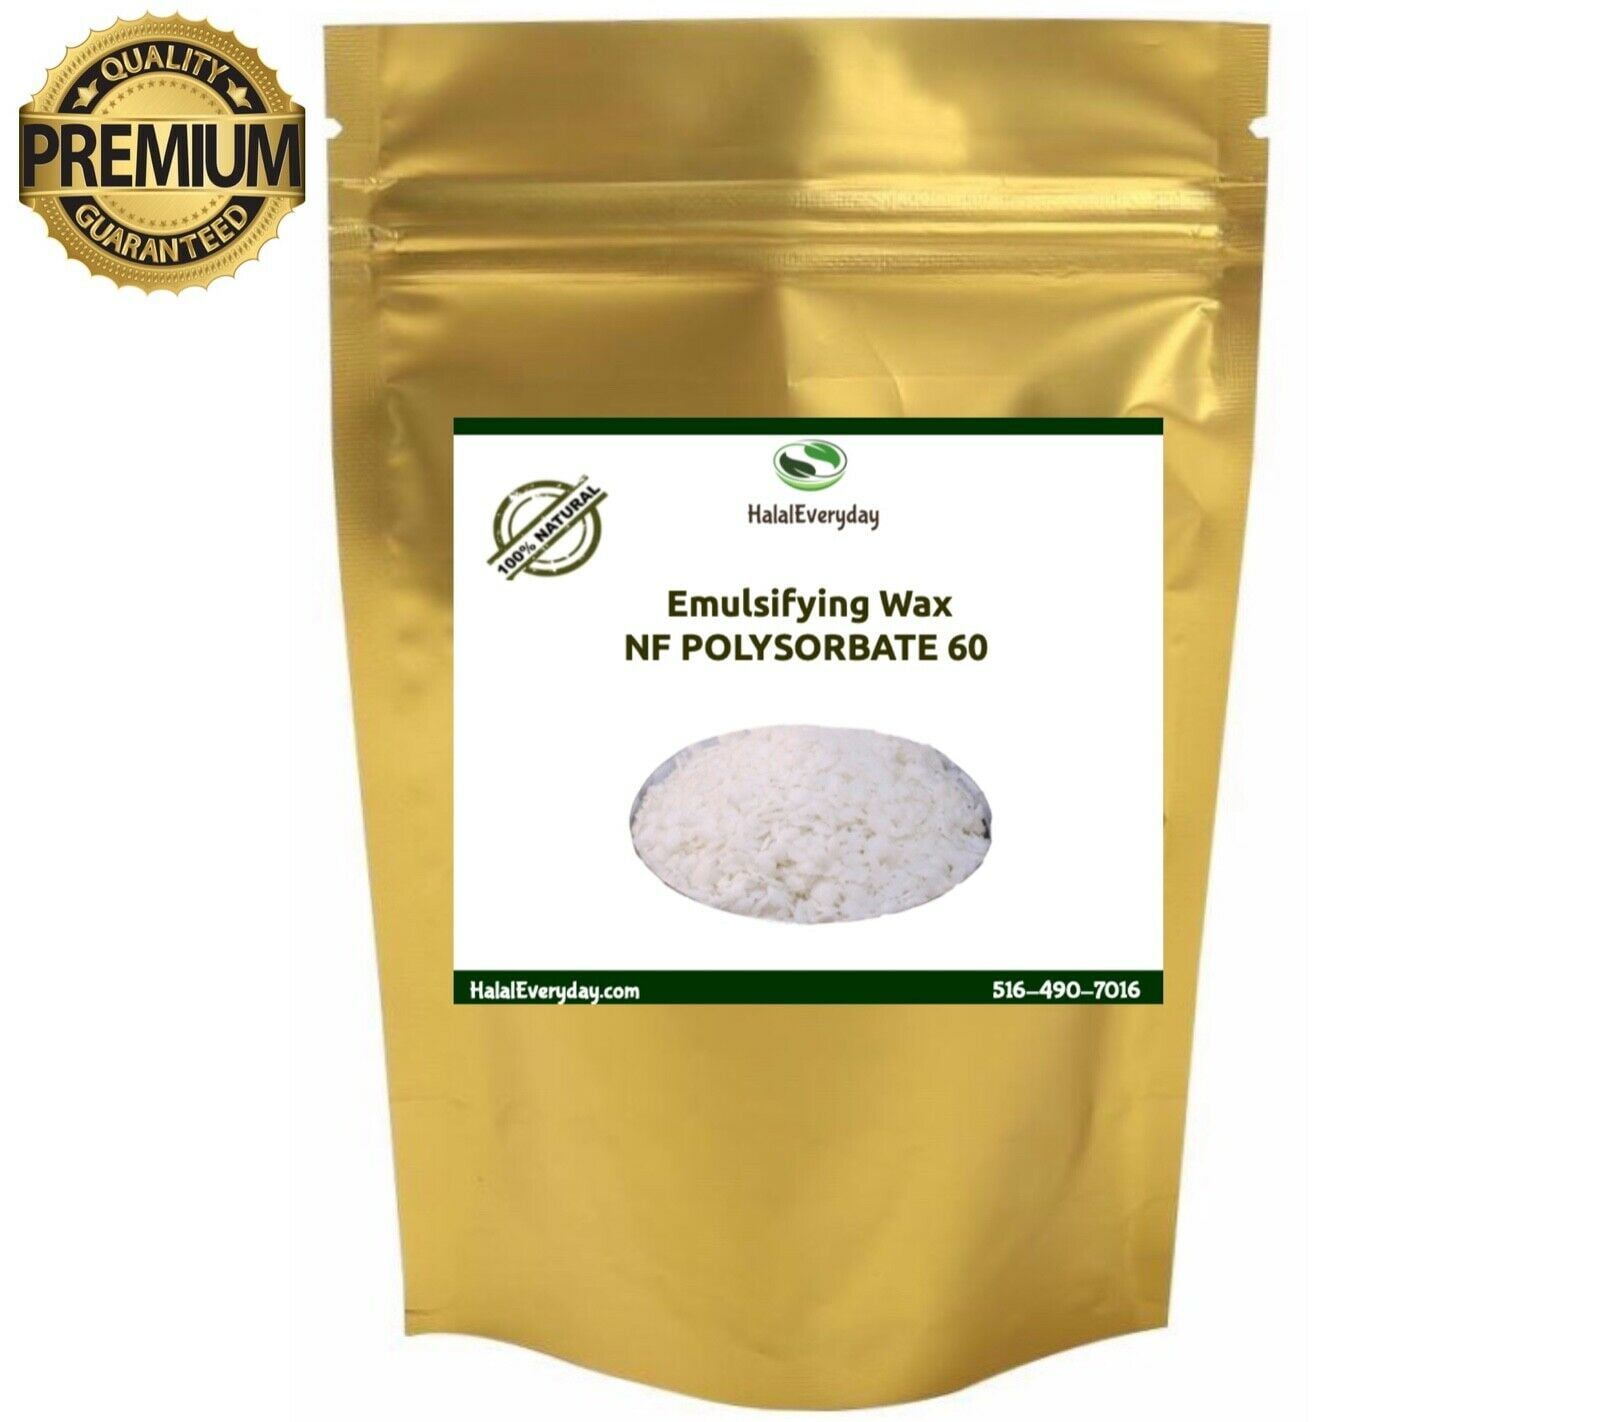 EMULSIFYING WAX NF POLYSORBATE 60 PURE POLAWAX 100% PURE 2 OZ to 23 LBS